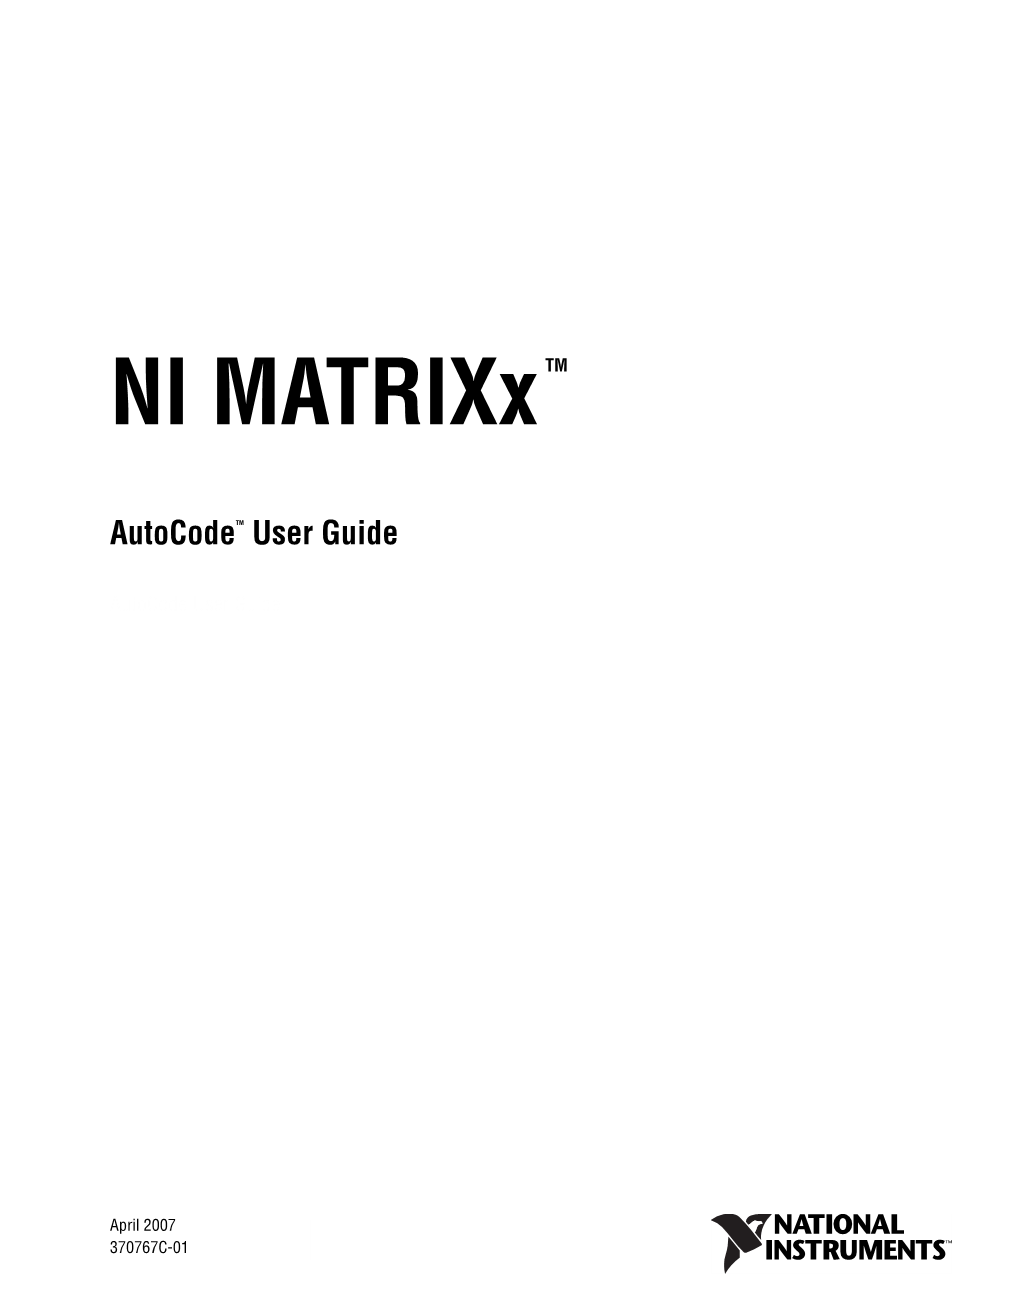 Archived: Autocode User Guide